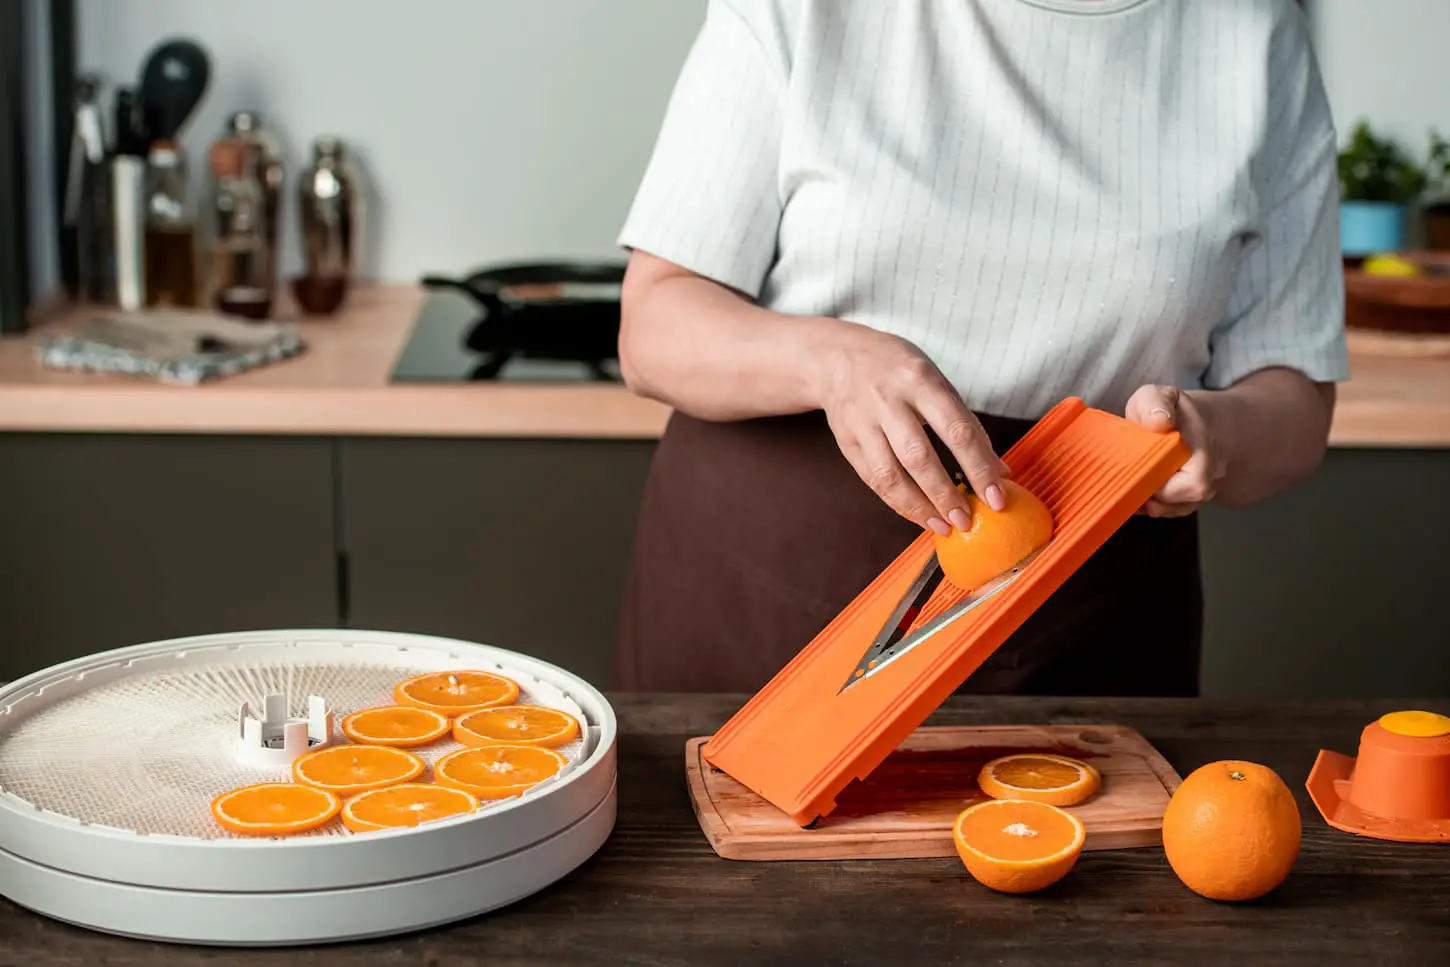 An image of an unrecognizable woman standing at home kitchen and cutting oranges on slicer while dehydrating it at home.